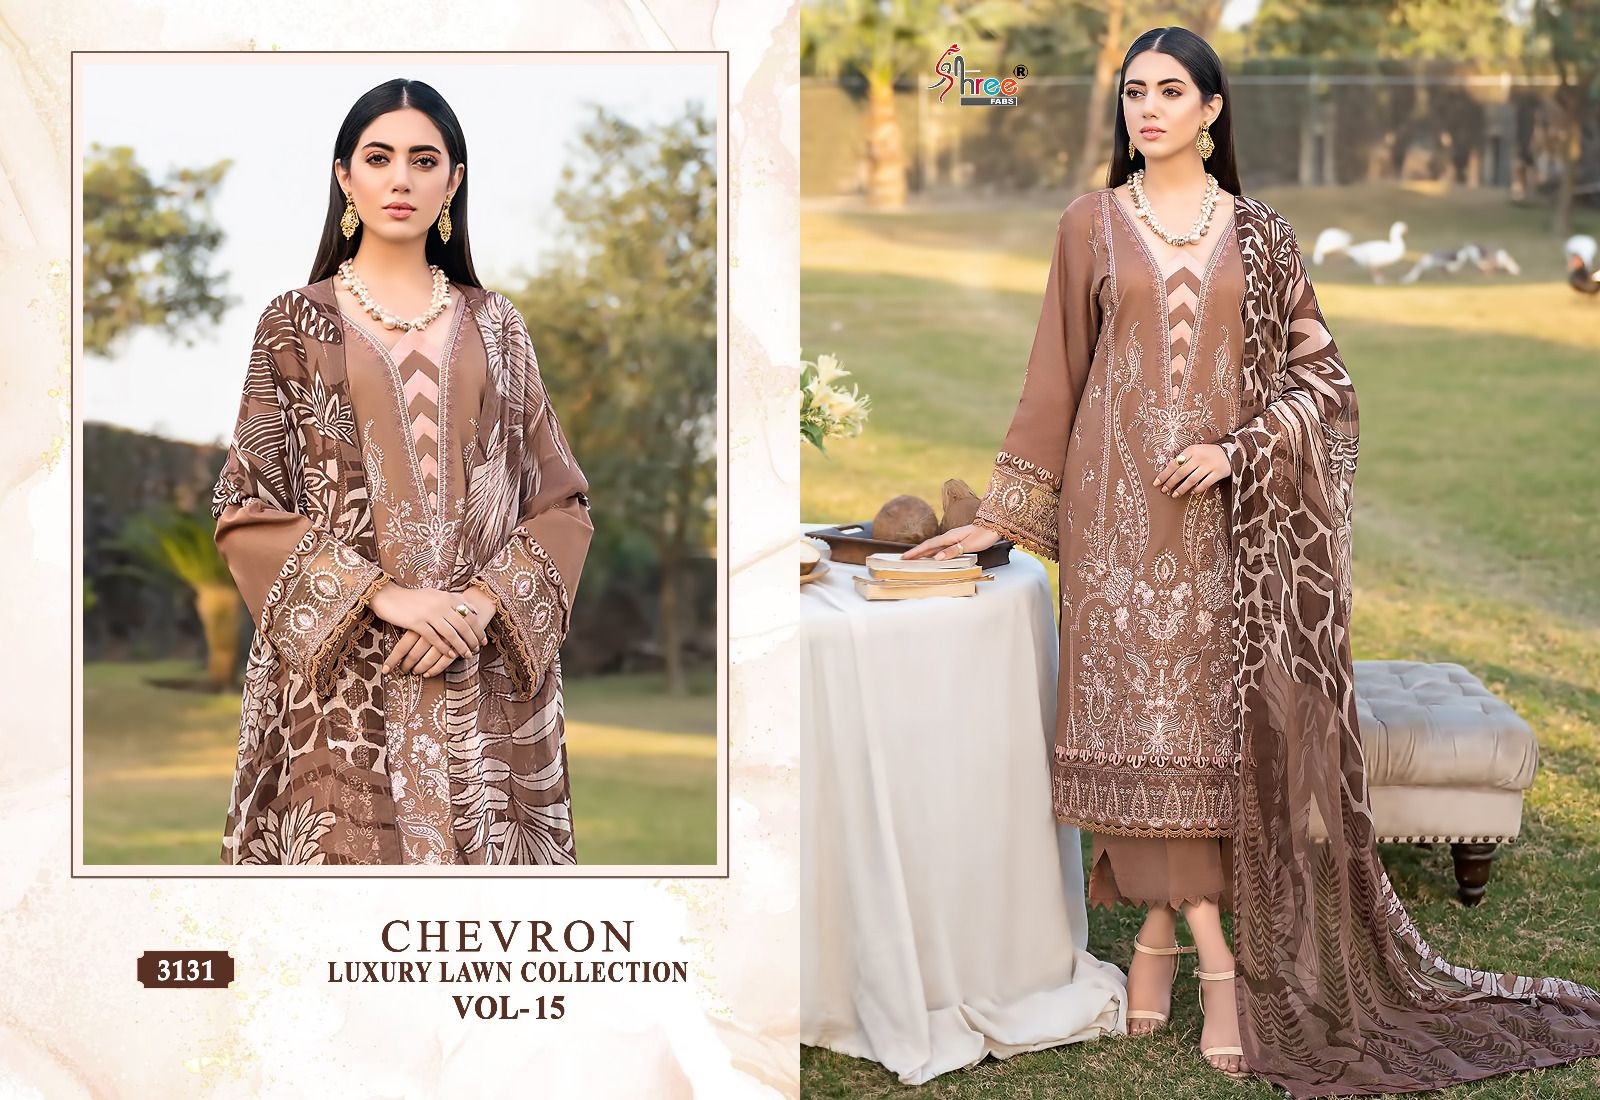 Shree Chevron Luxury Lawn Collection Vol 15 collection 2